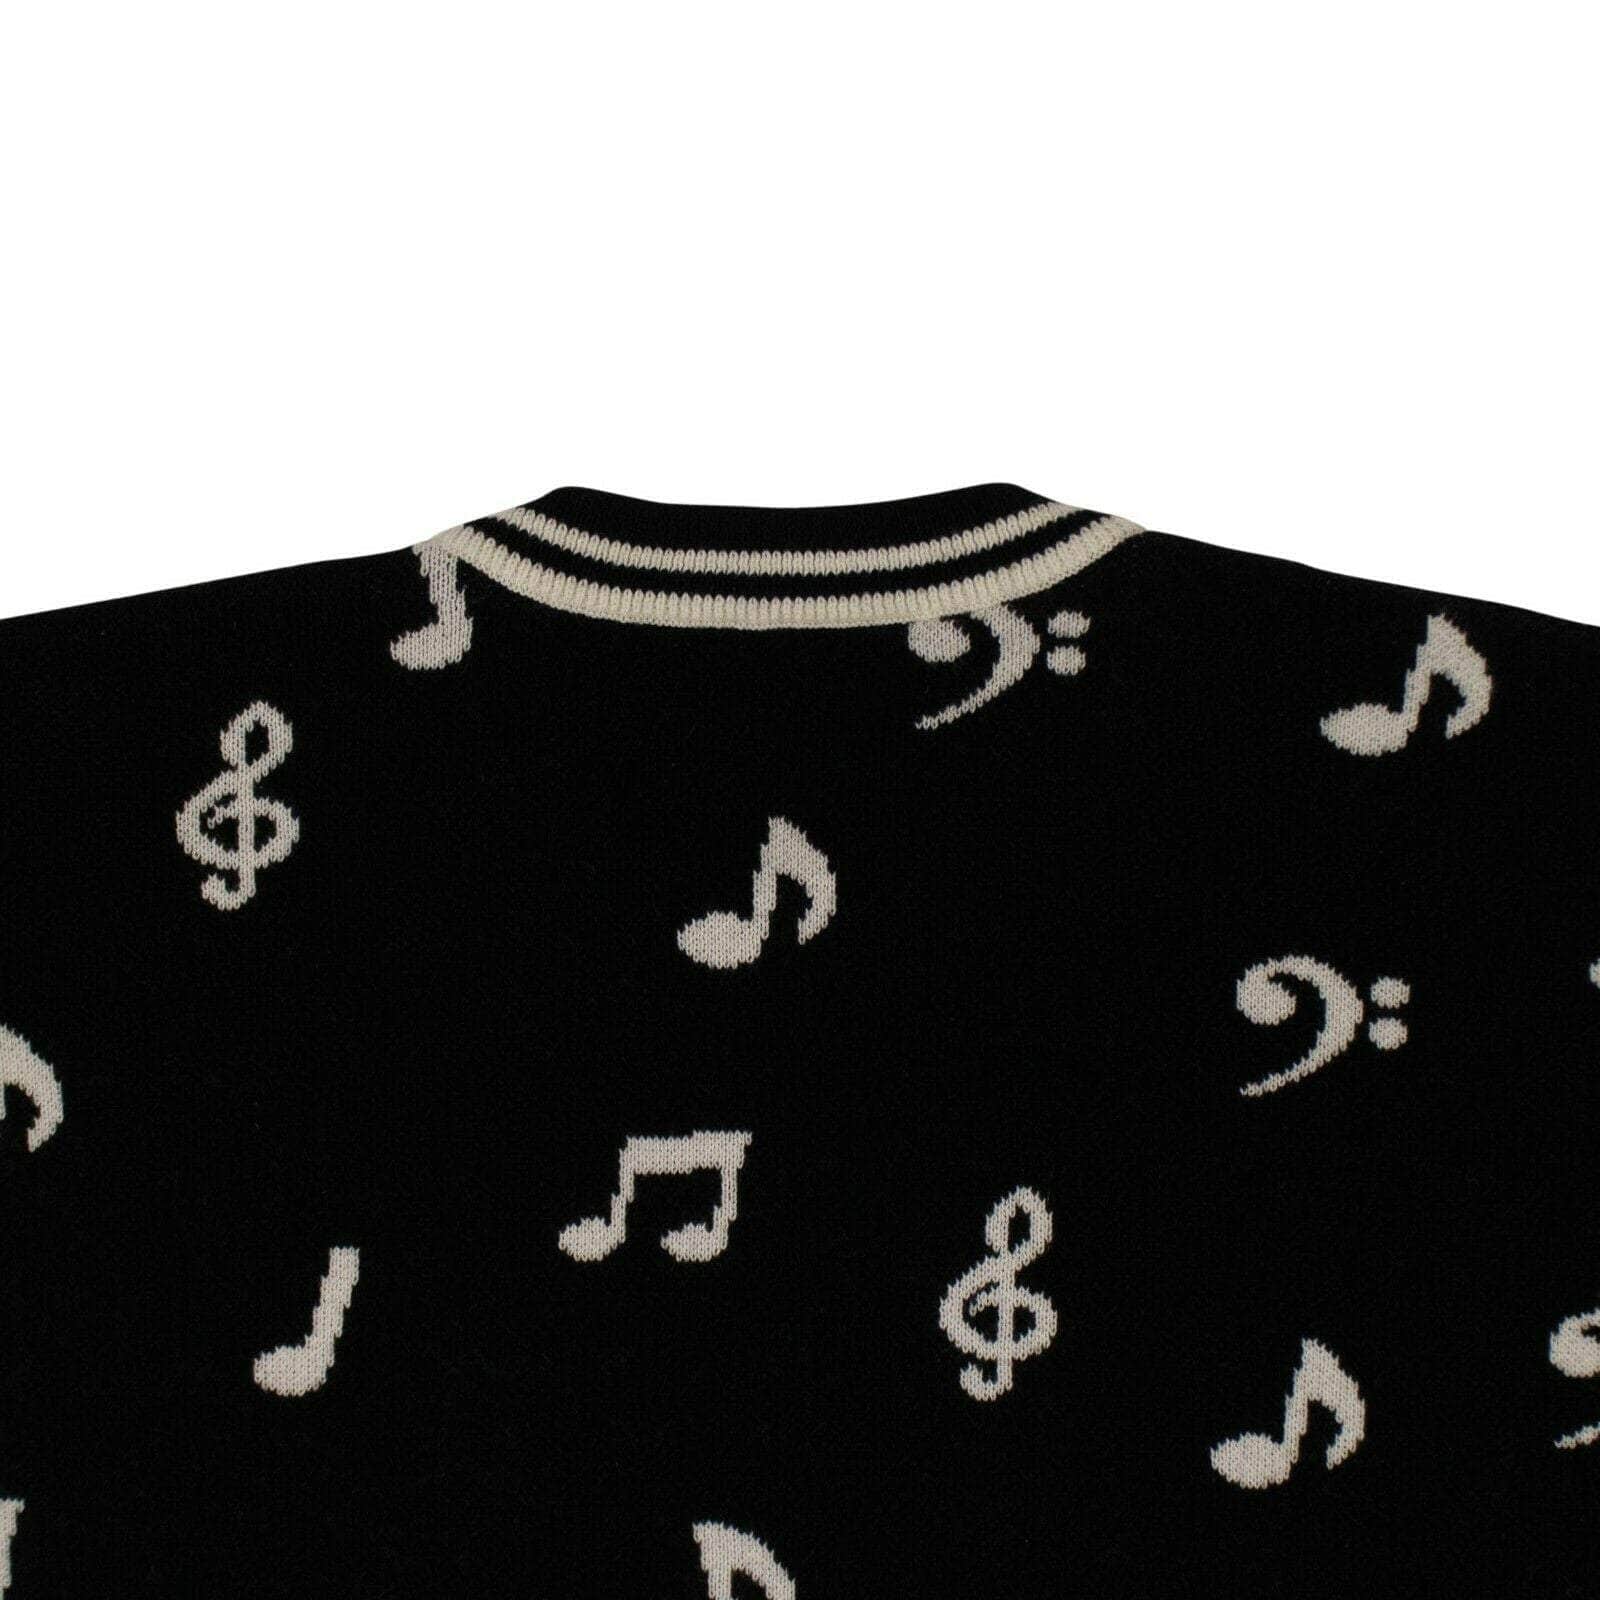 Just Don Men's Sweaters S 'Piano Note' Short Sleeves Crew Tee Sweater - Black 69LE-1801/S 69LE-1801/S